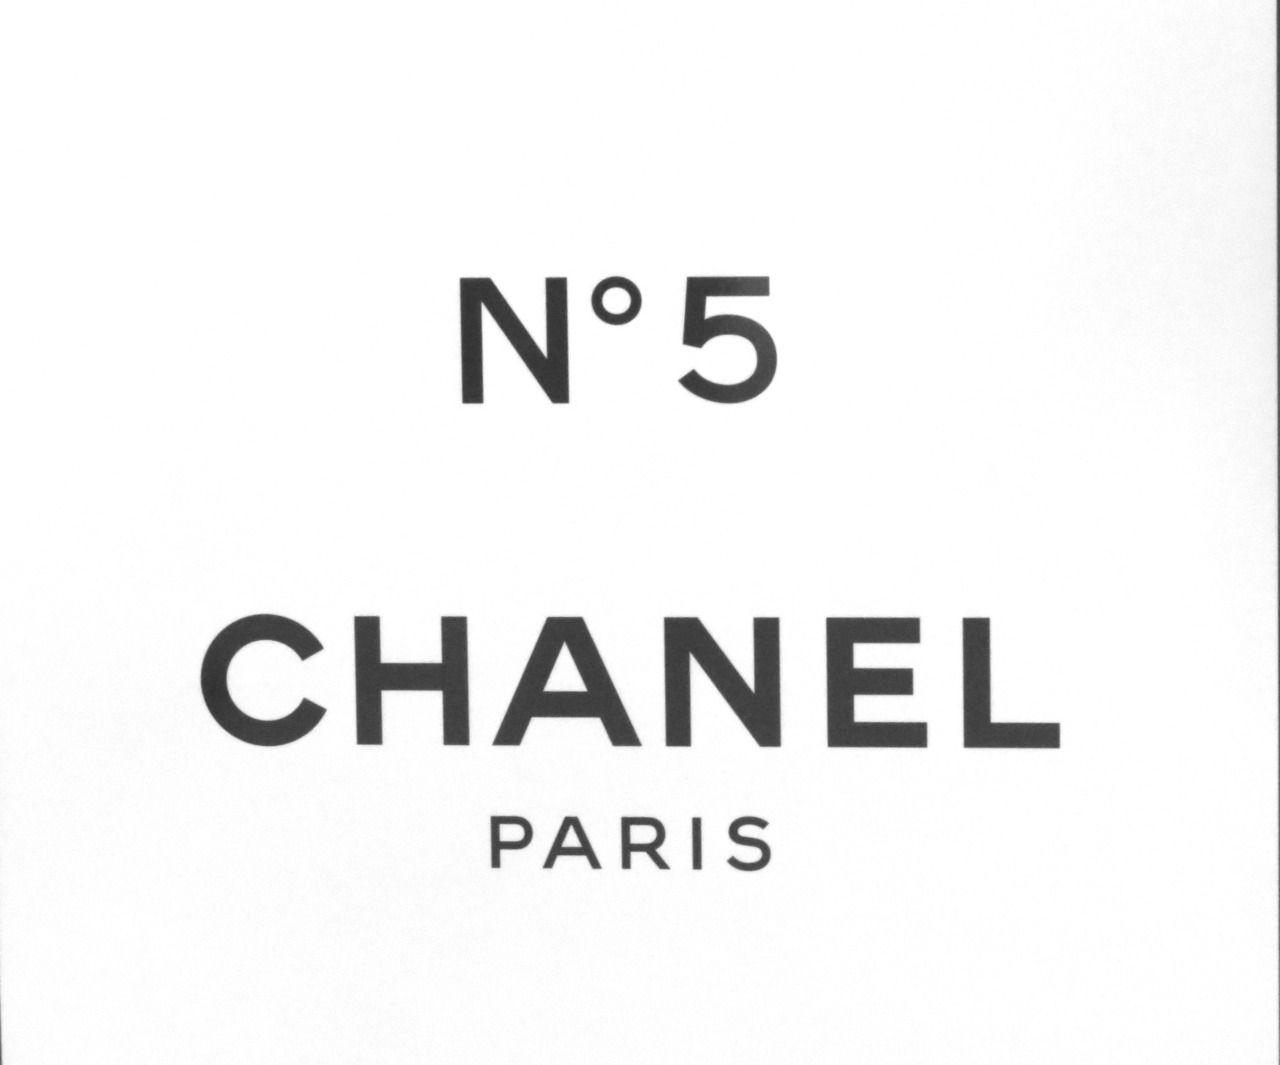 Chanel Paris Logo - image about Chanel. See more about chanel